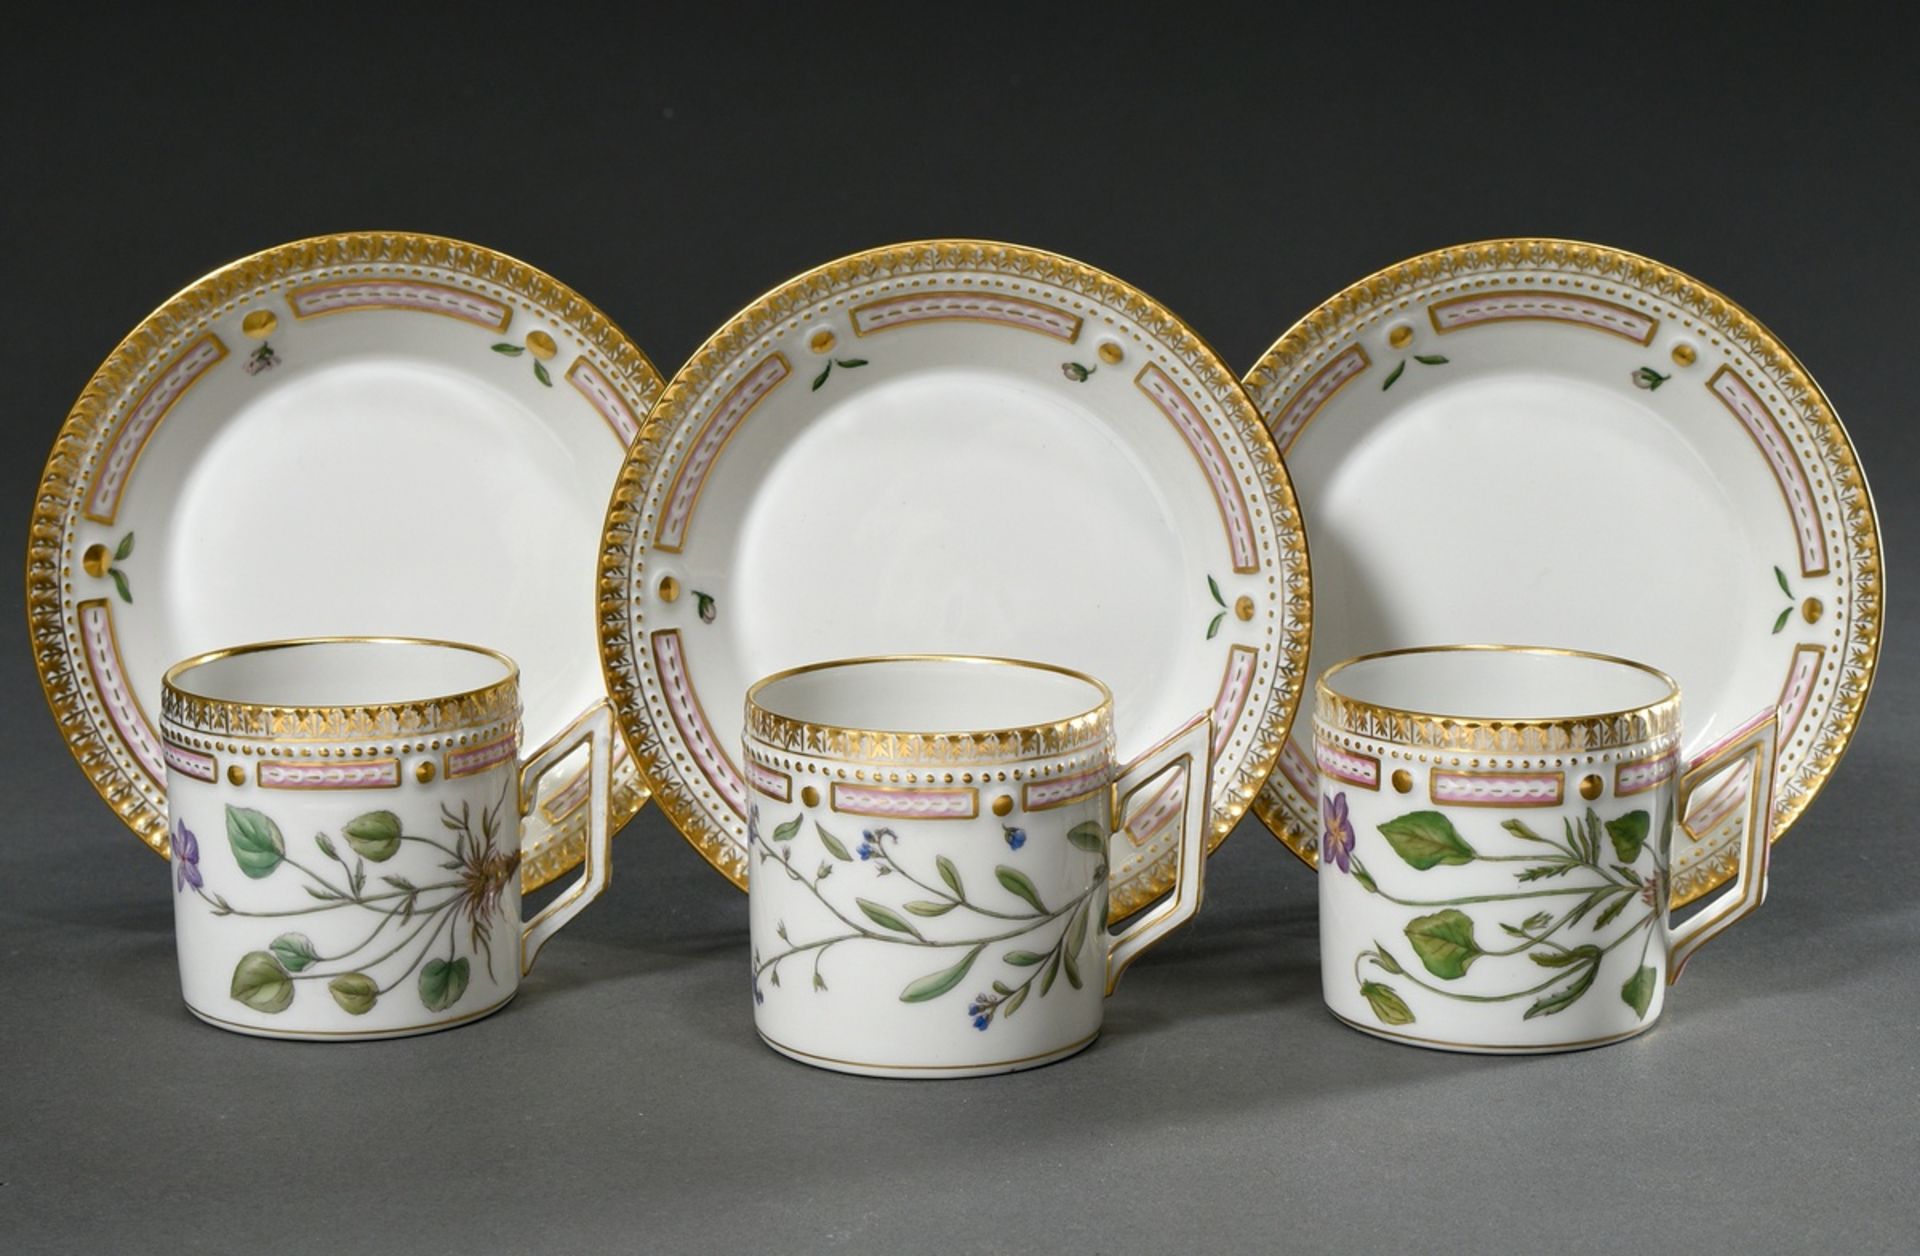 3 Royal Cophenhagen "Flora Danica" coffee cups/saucers in cylindrical form with circular polychrome